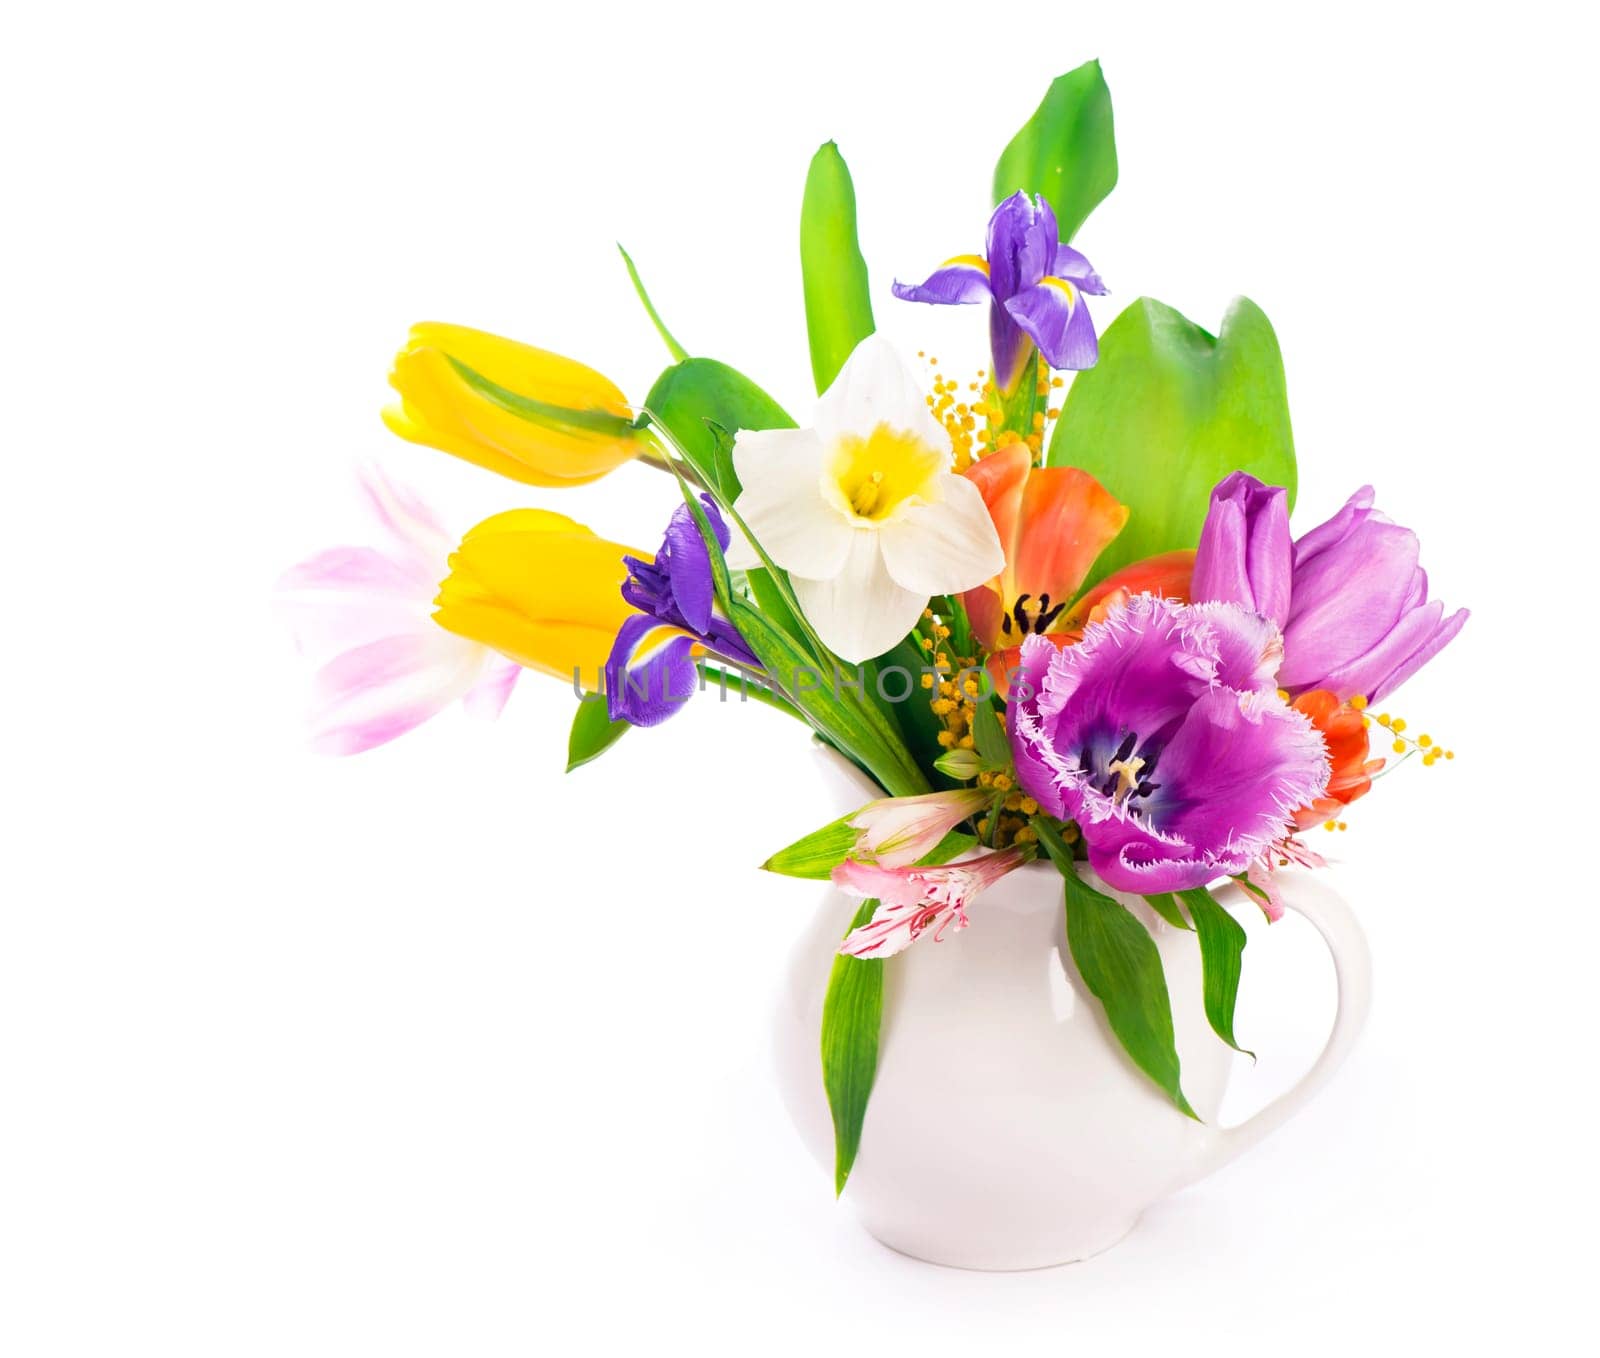 Bright spring bouquet in a white vase. spring flowers, daffodils, tulips, hyacinths, irises and mimosa isolated on a white background by aprilphoto